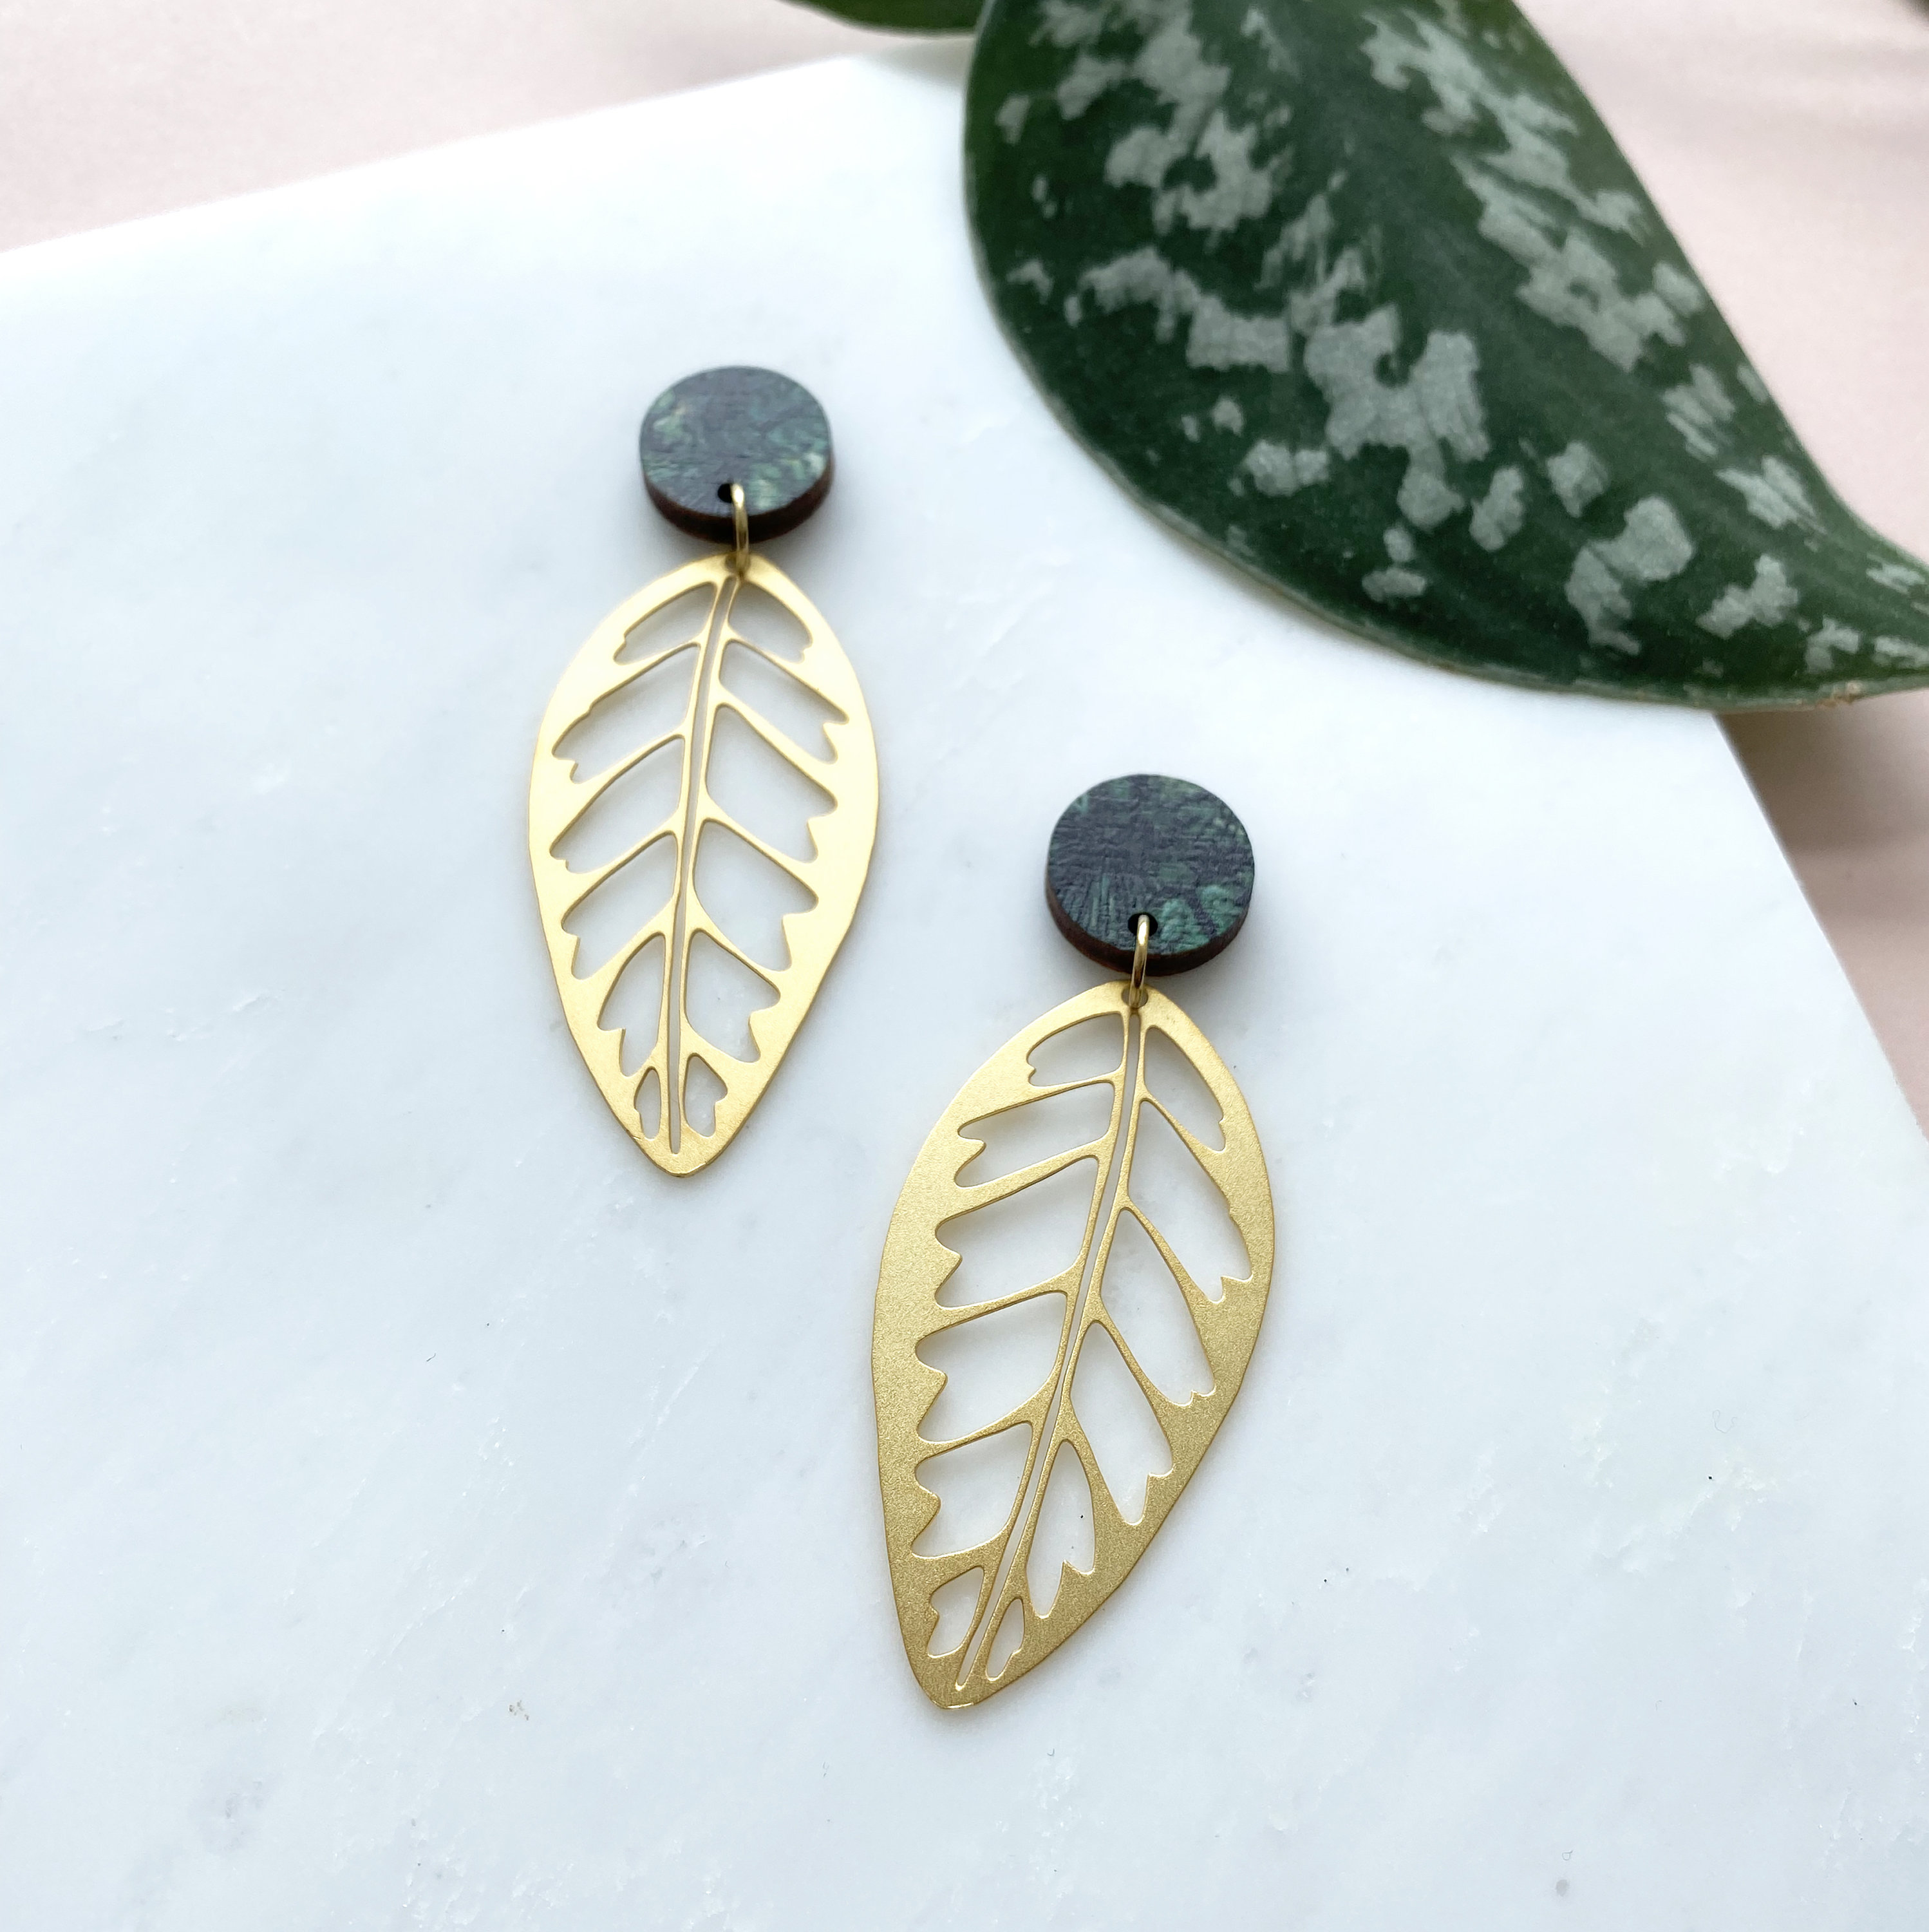 Tropical Gold Leaf Statement Drop Earrings - House Plant Jewellery Gift For Lover Calathea Zebrina